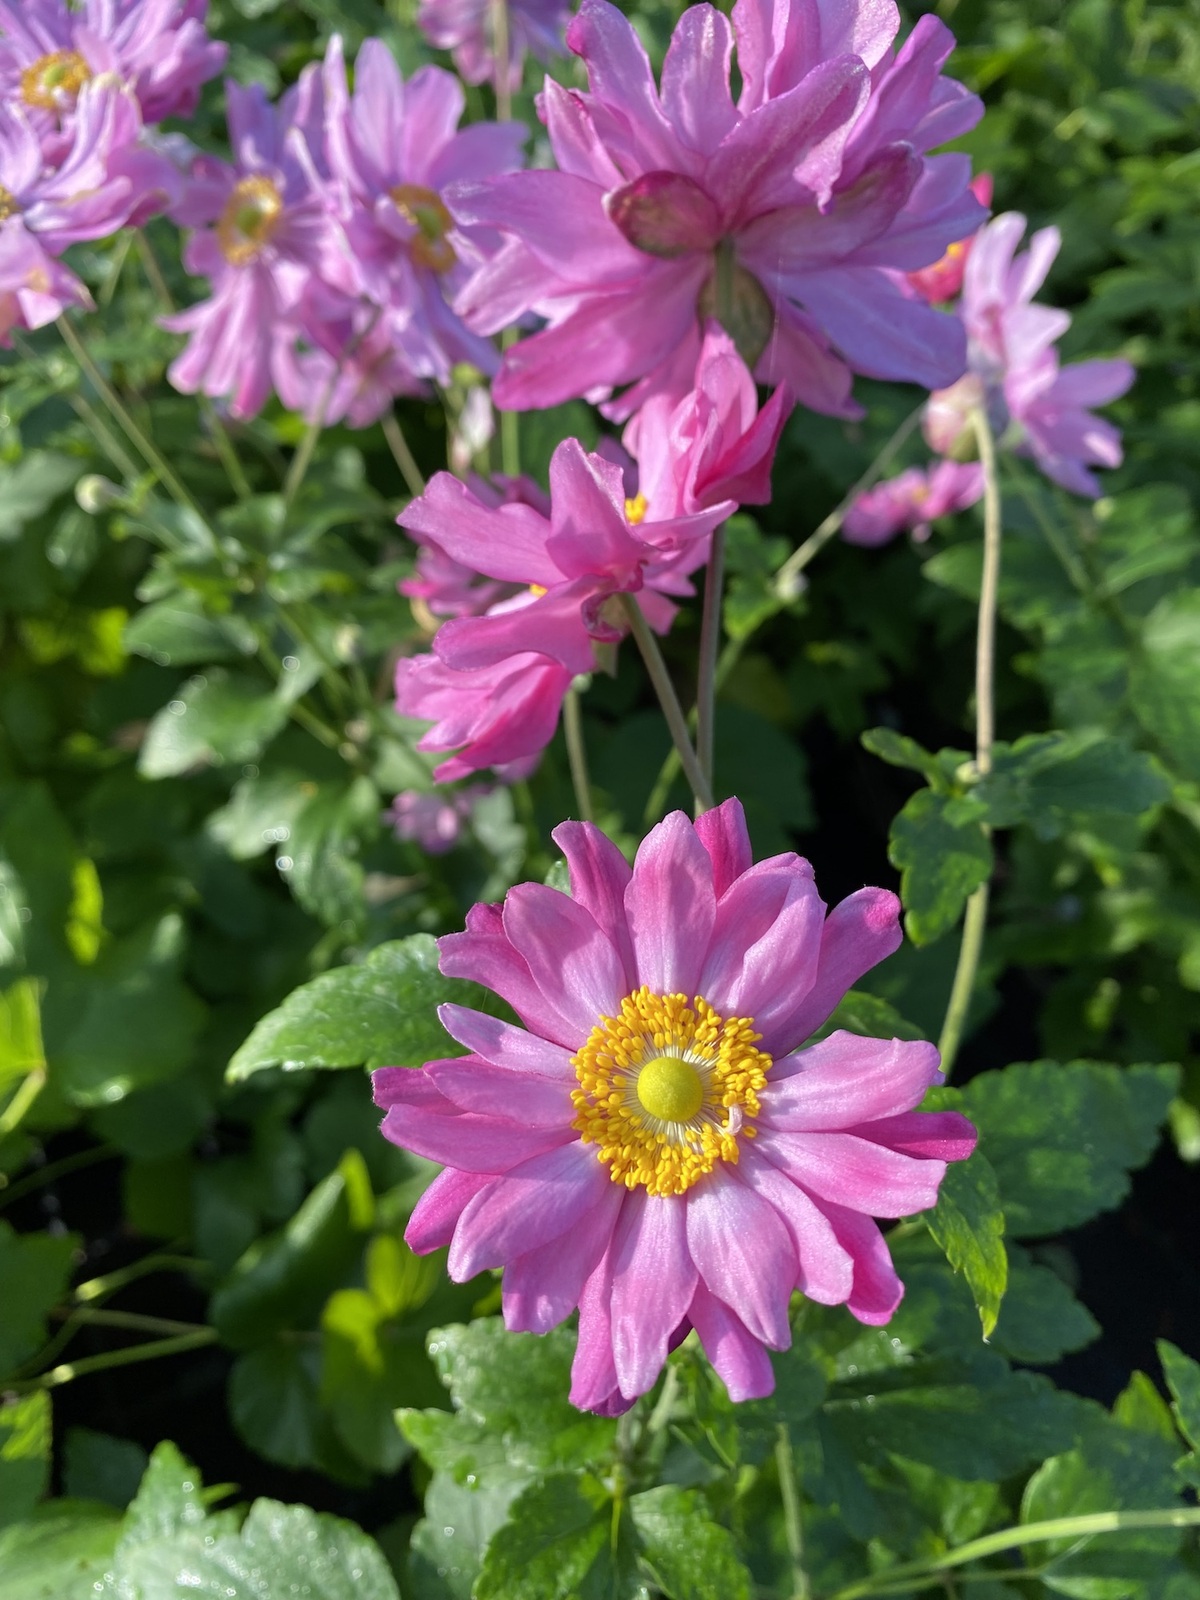 Anemone var. japonica 'Pamina' - The Beth Chatto Gardens